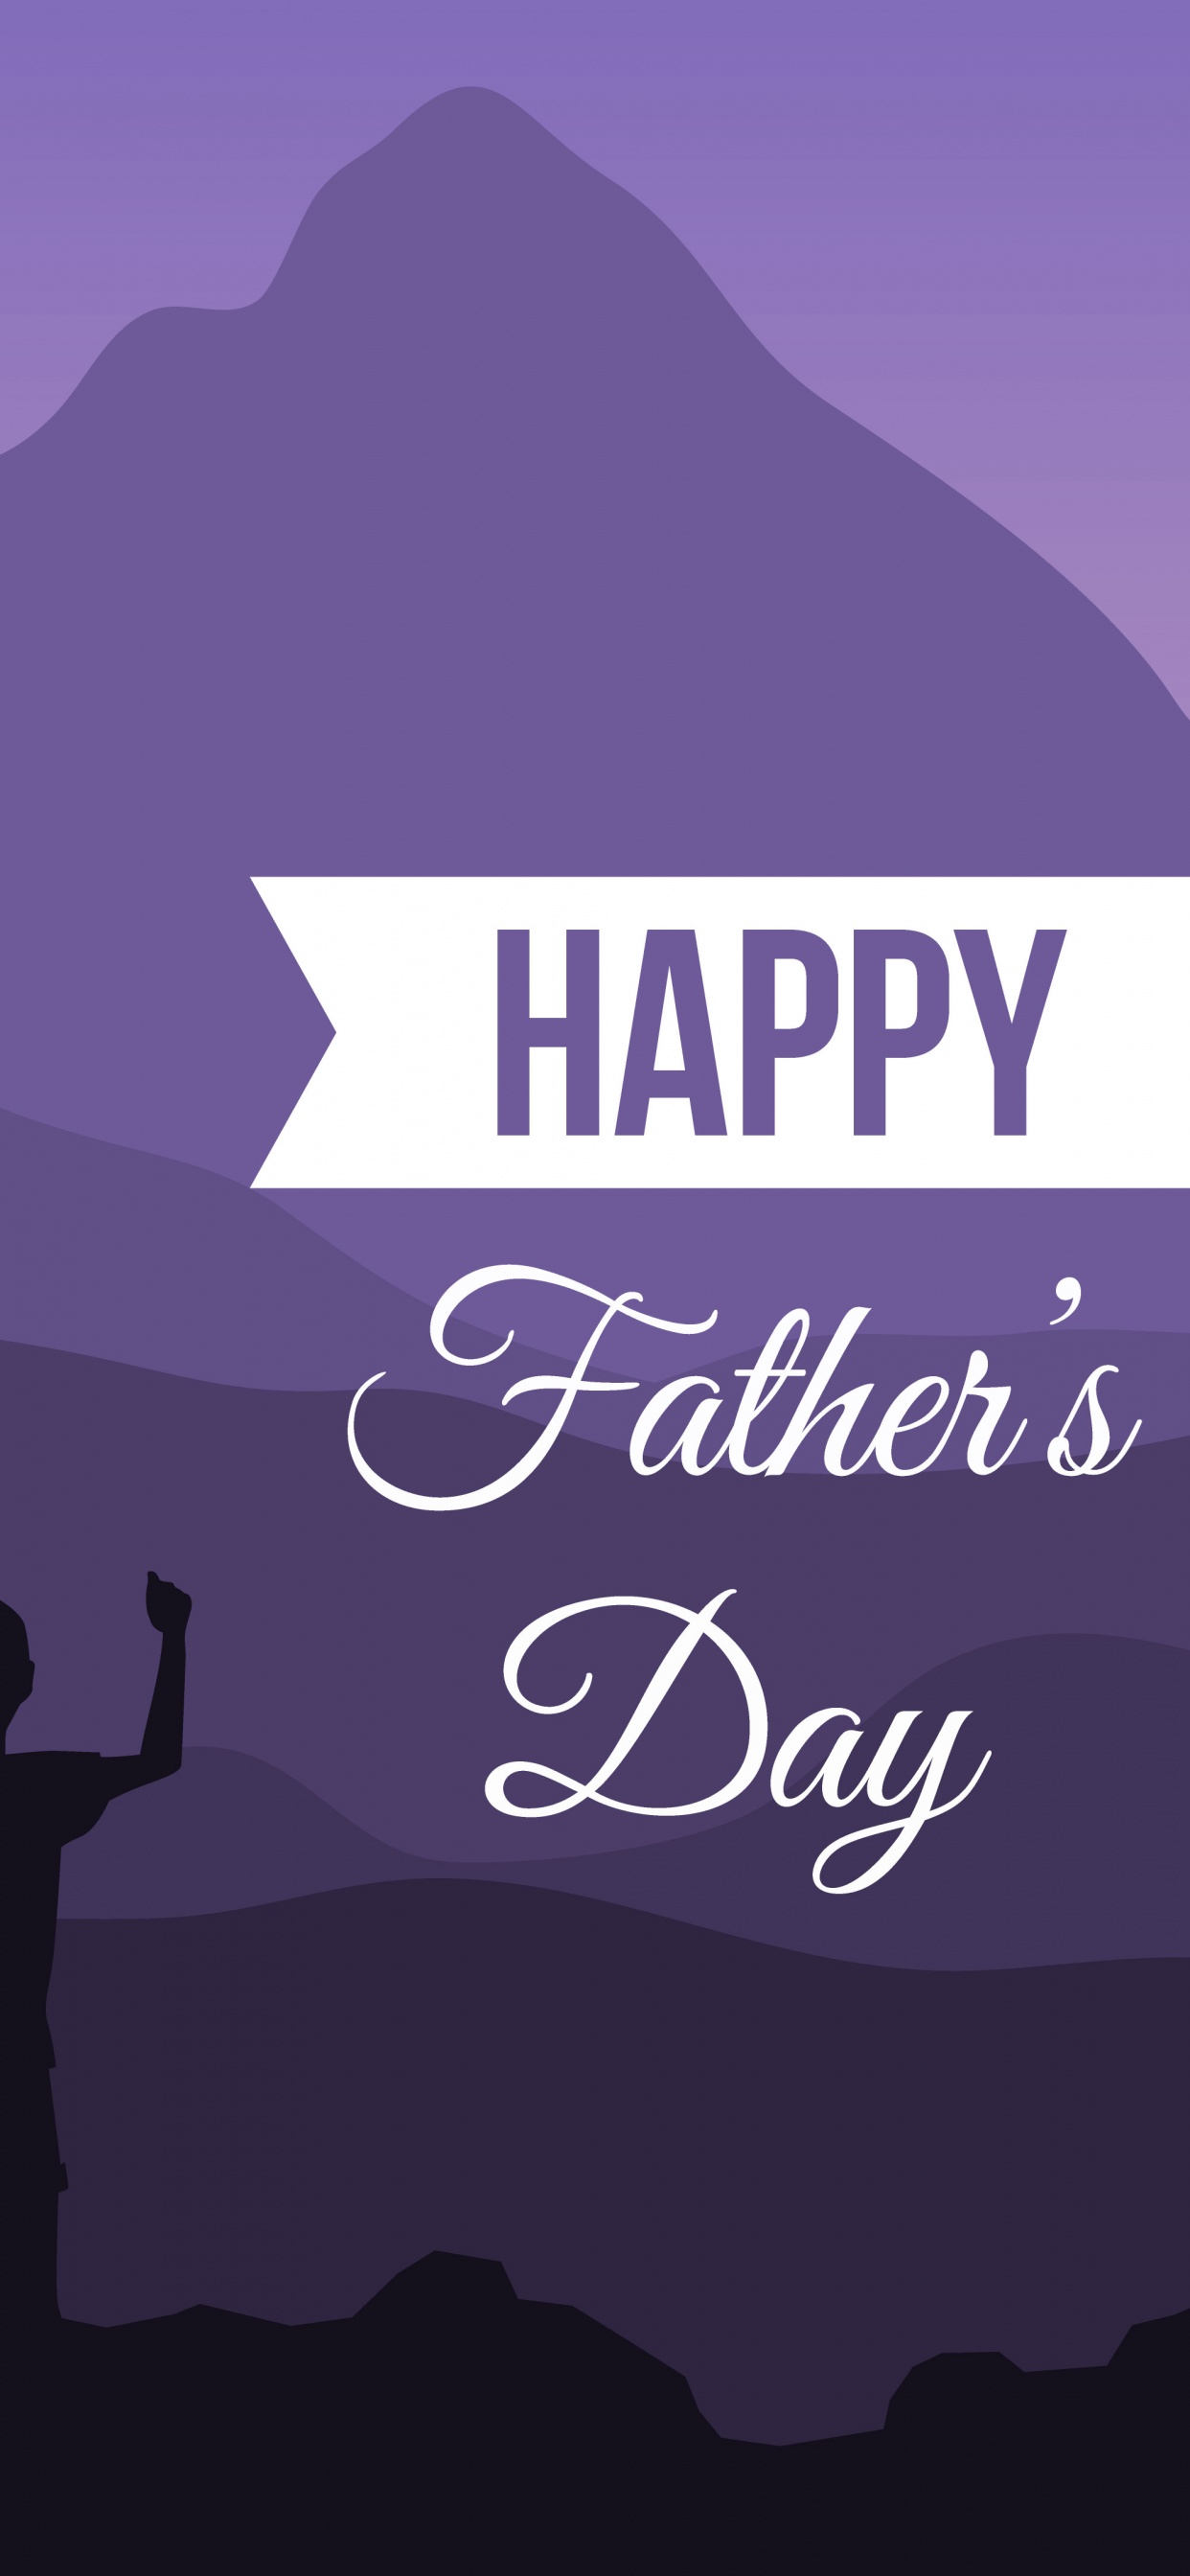 Happy Fathers Day Images HD Quotes Shayari Wishes  हपप फदरस ड 2023